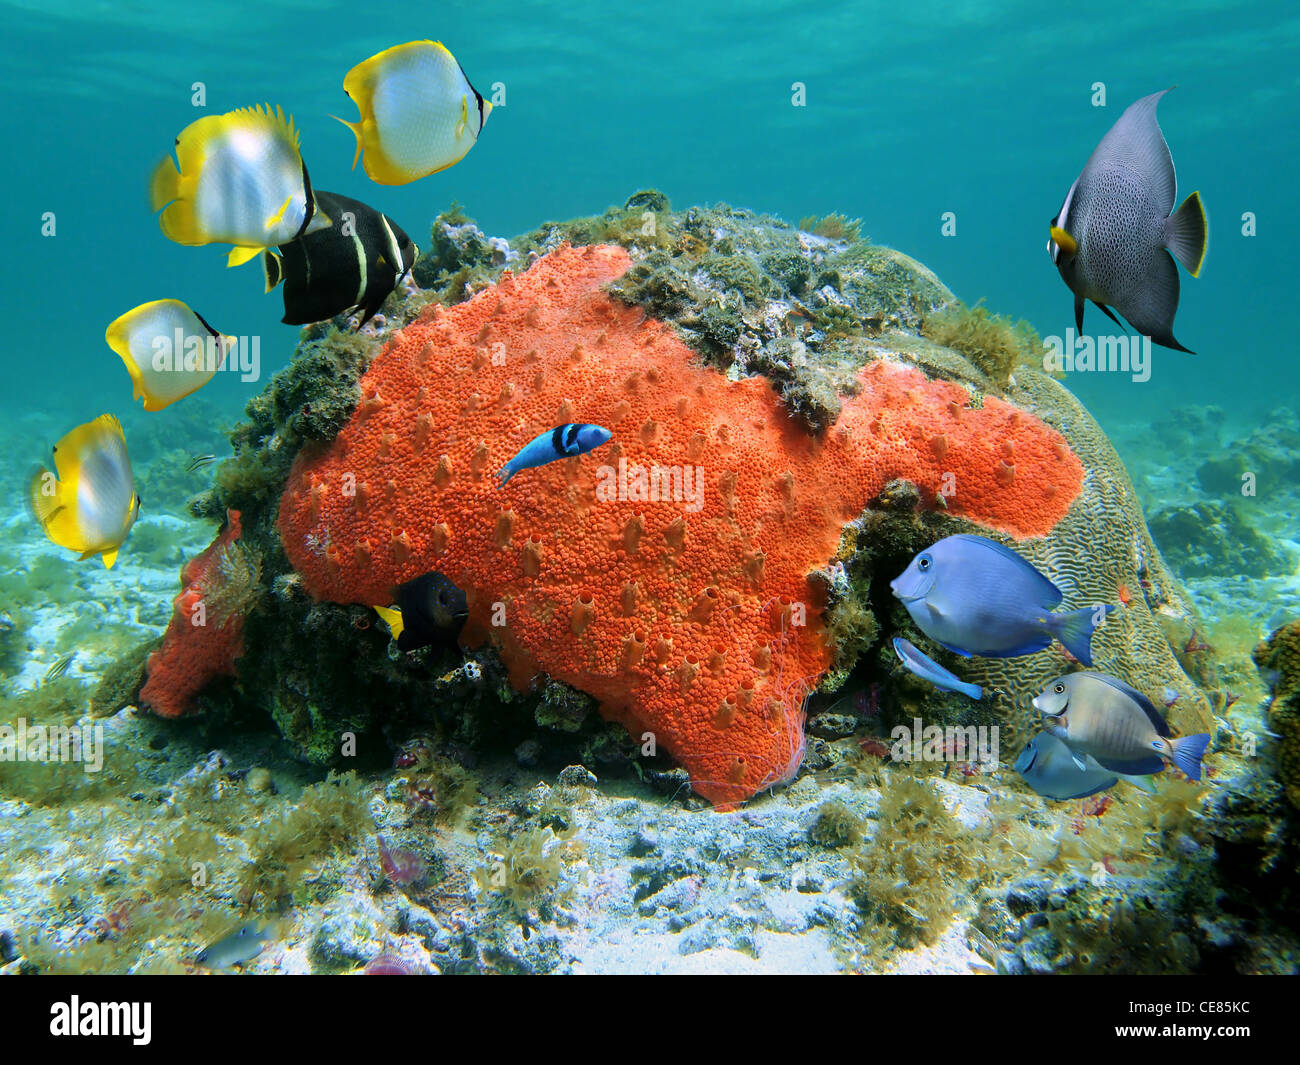 Colorful tropical fish underwater with a red boring sponge, Caribbean sea Stock Photo